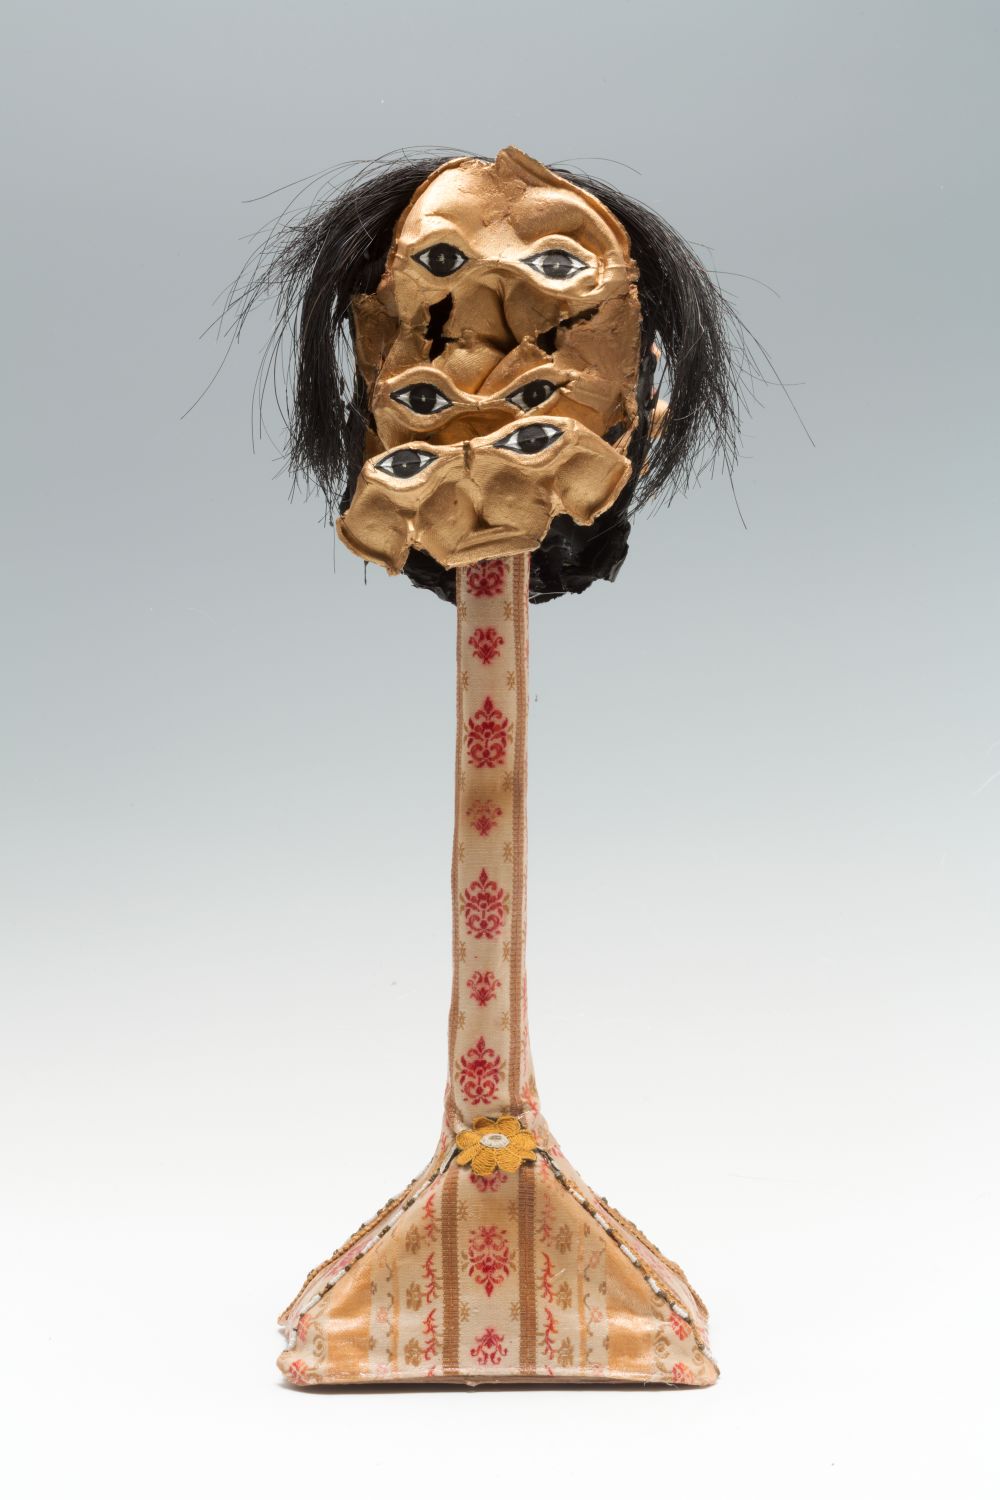 A mixed media sculpture of a figure with multiple sets of eyes and hair. There is a patterned motif on the upright body of the sculpture 